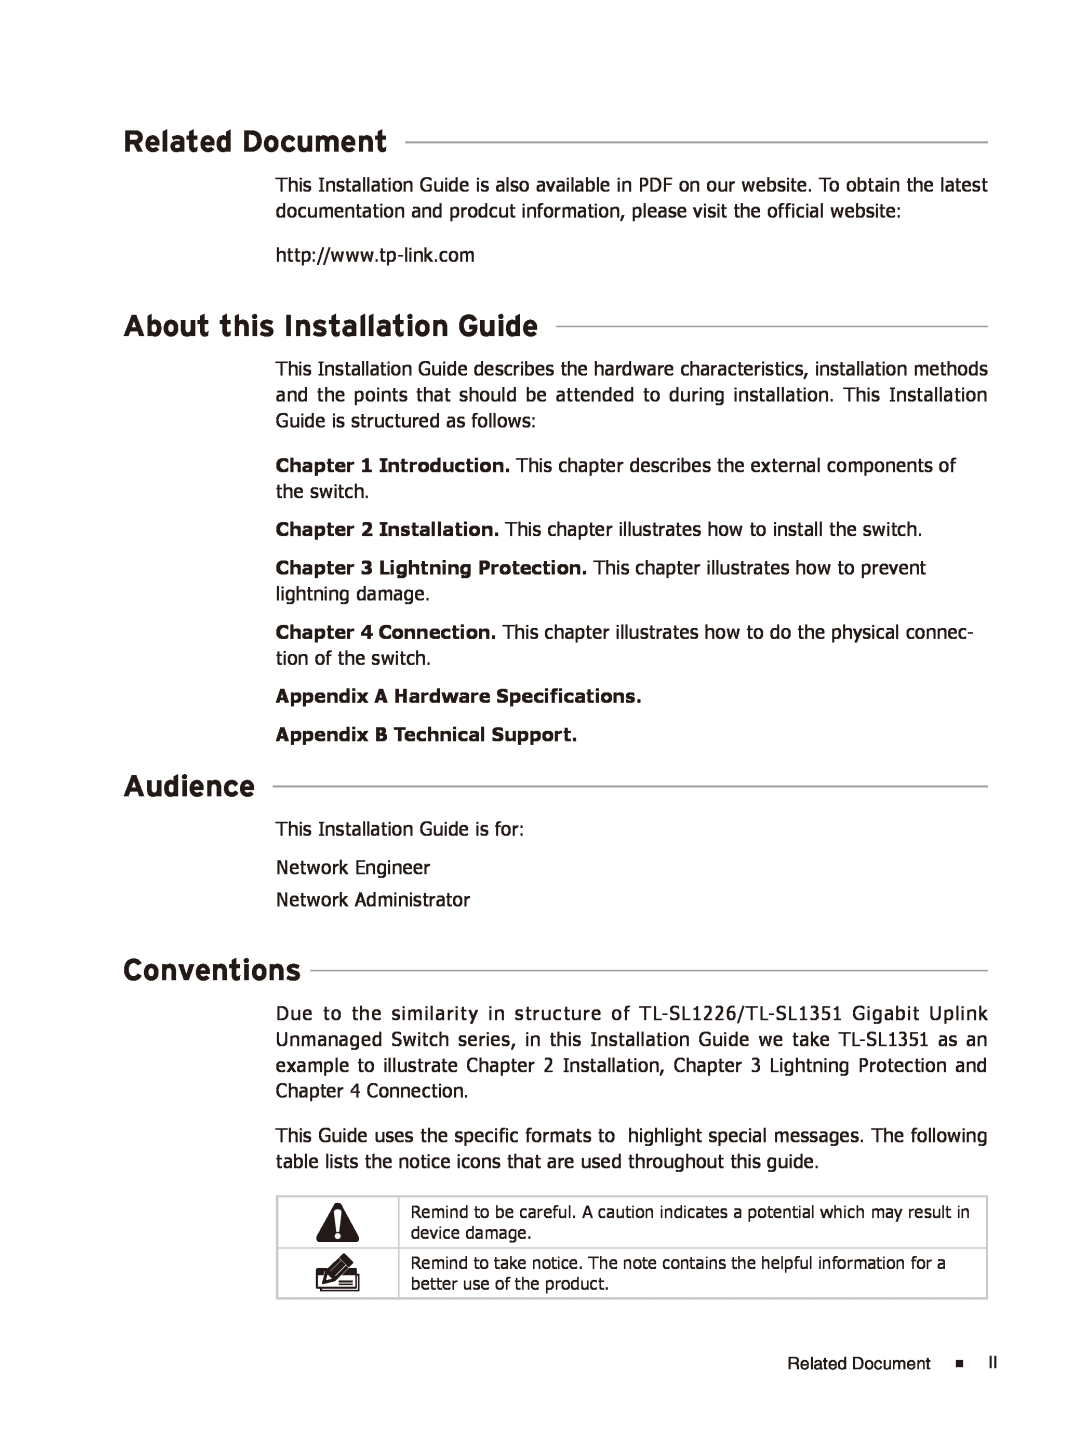 TP-Link TL-SL1226/TL-SL1351 manual Related Document, About this Installation Guide, Audience, Conventions 